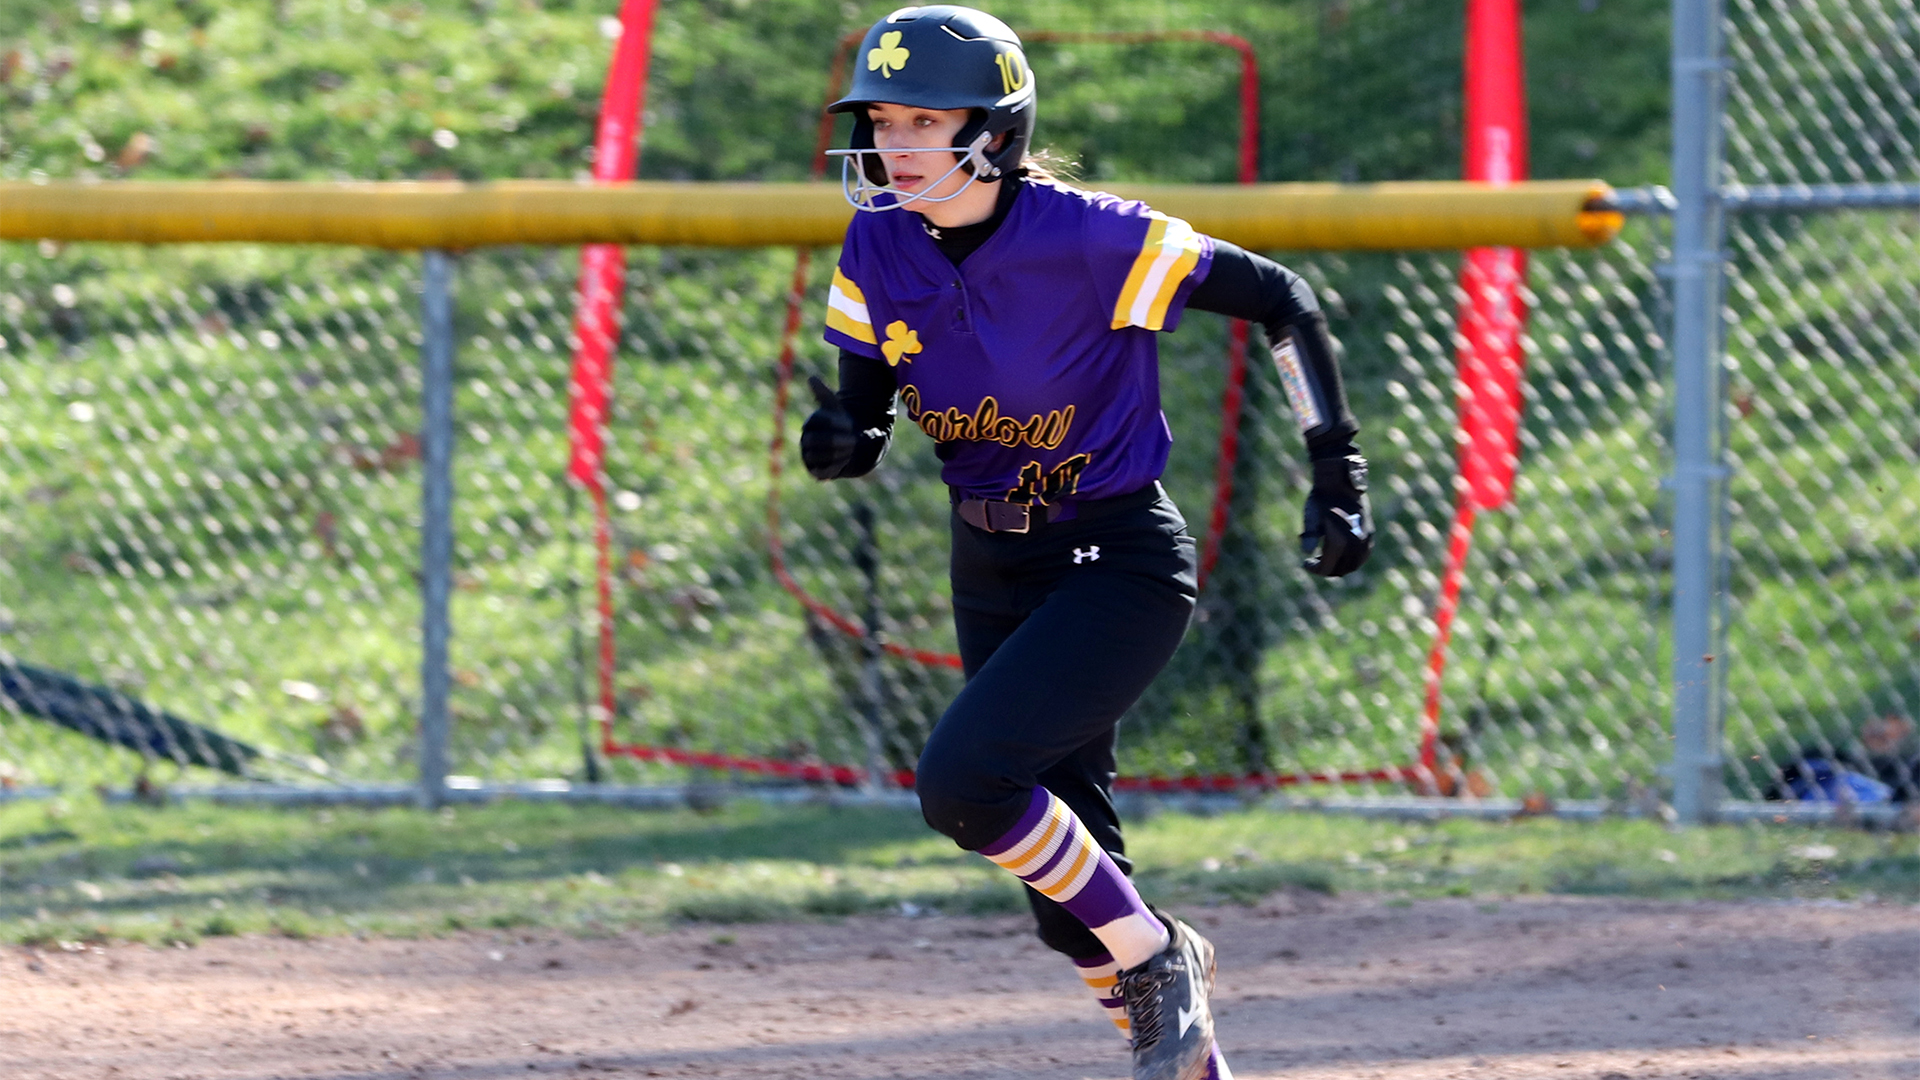 Bella Cartieri hit 3 for 6 with a double and three RBI. Photo